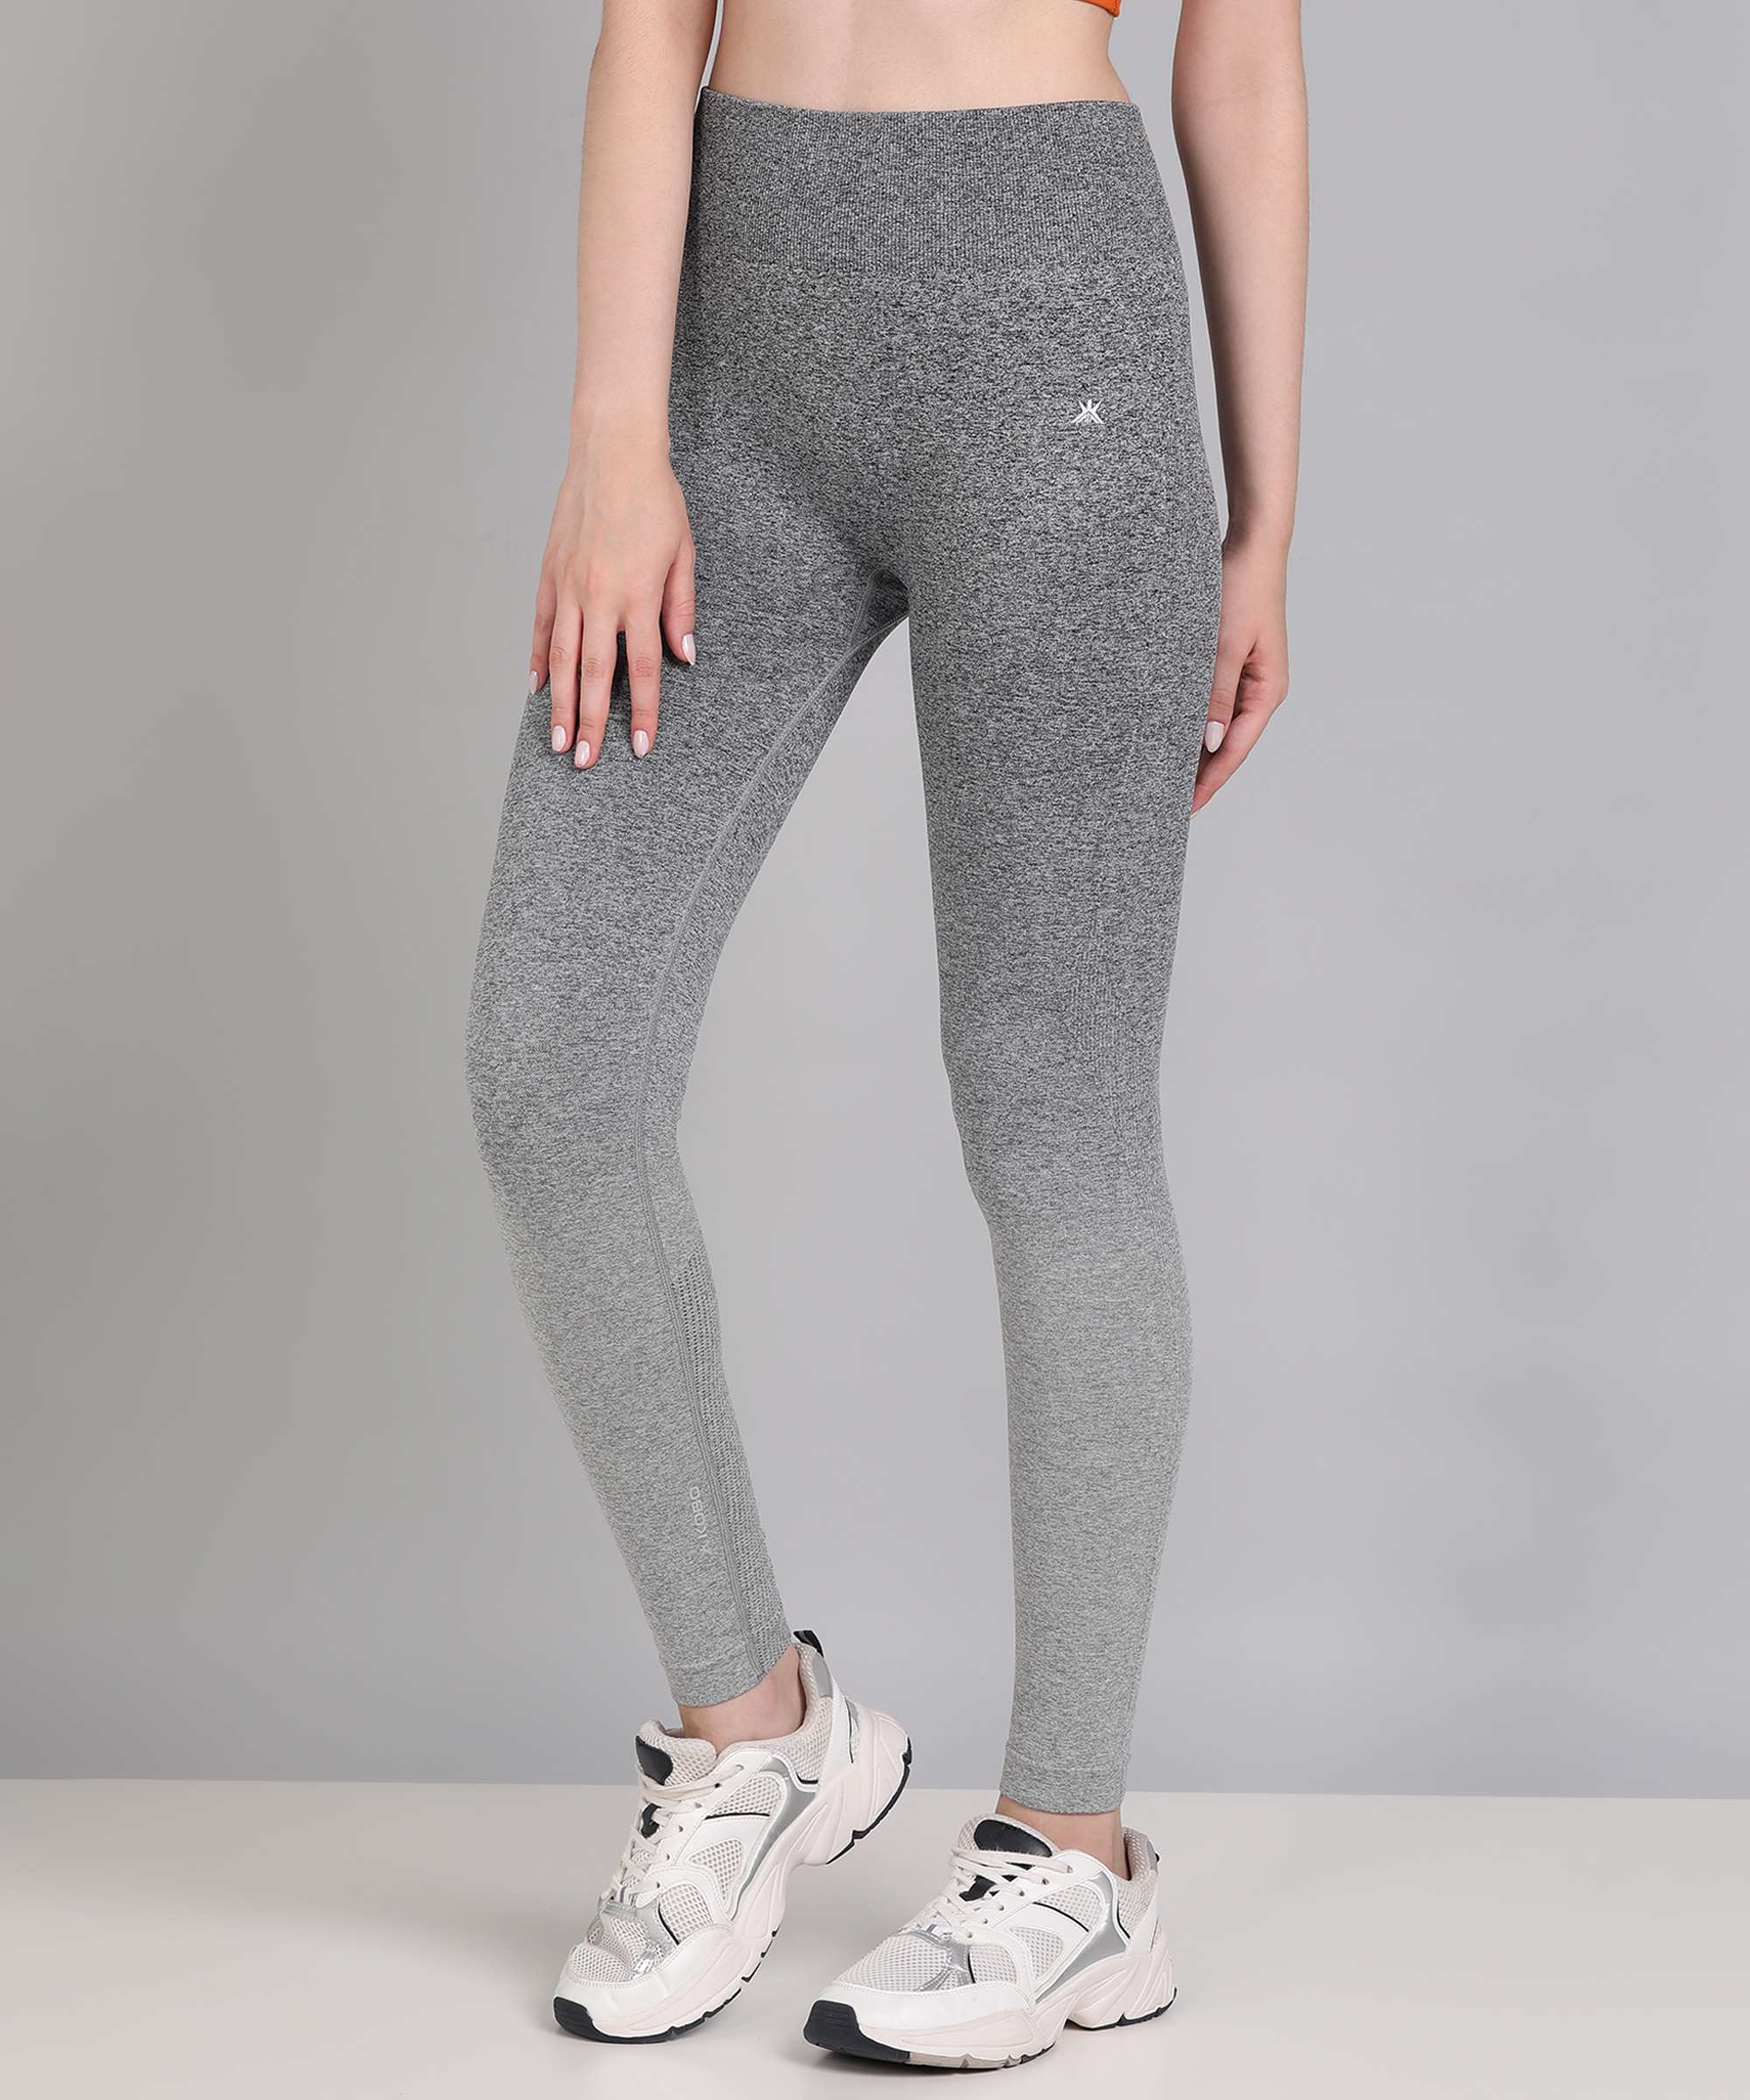 High Waisted Contour Gym Tights - Black And Grey Ombre